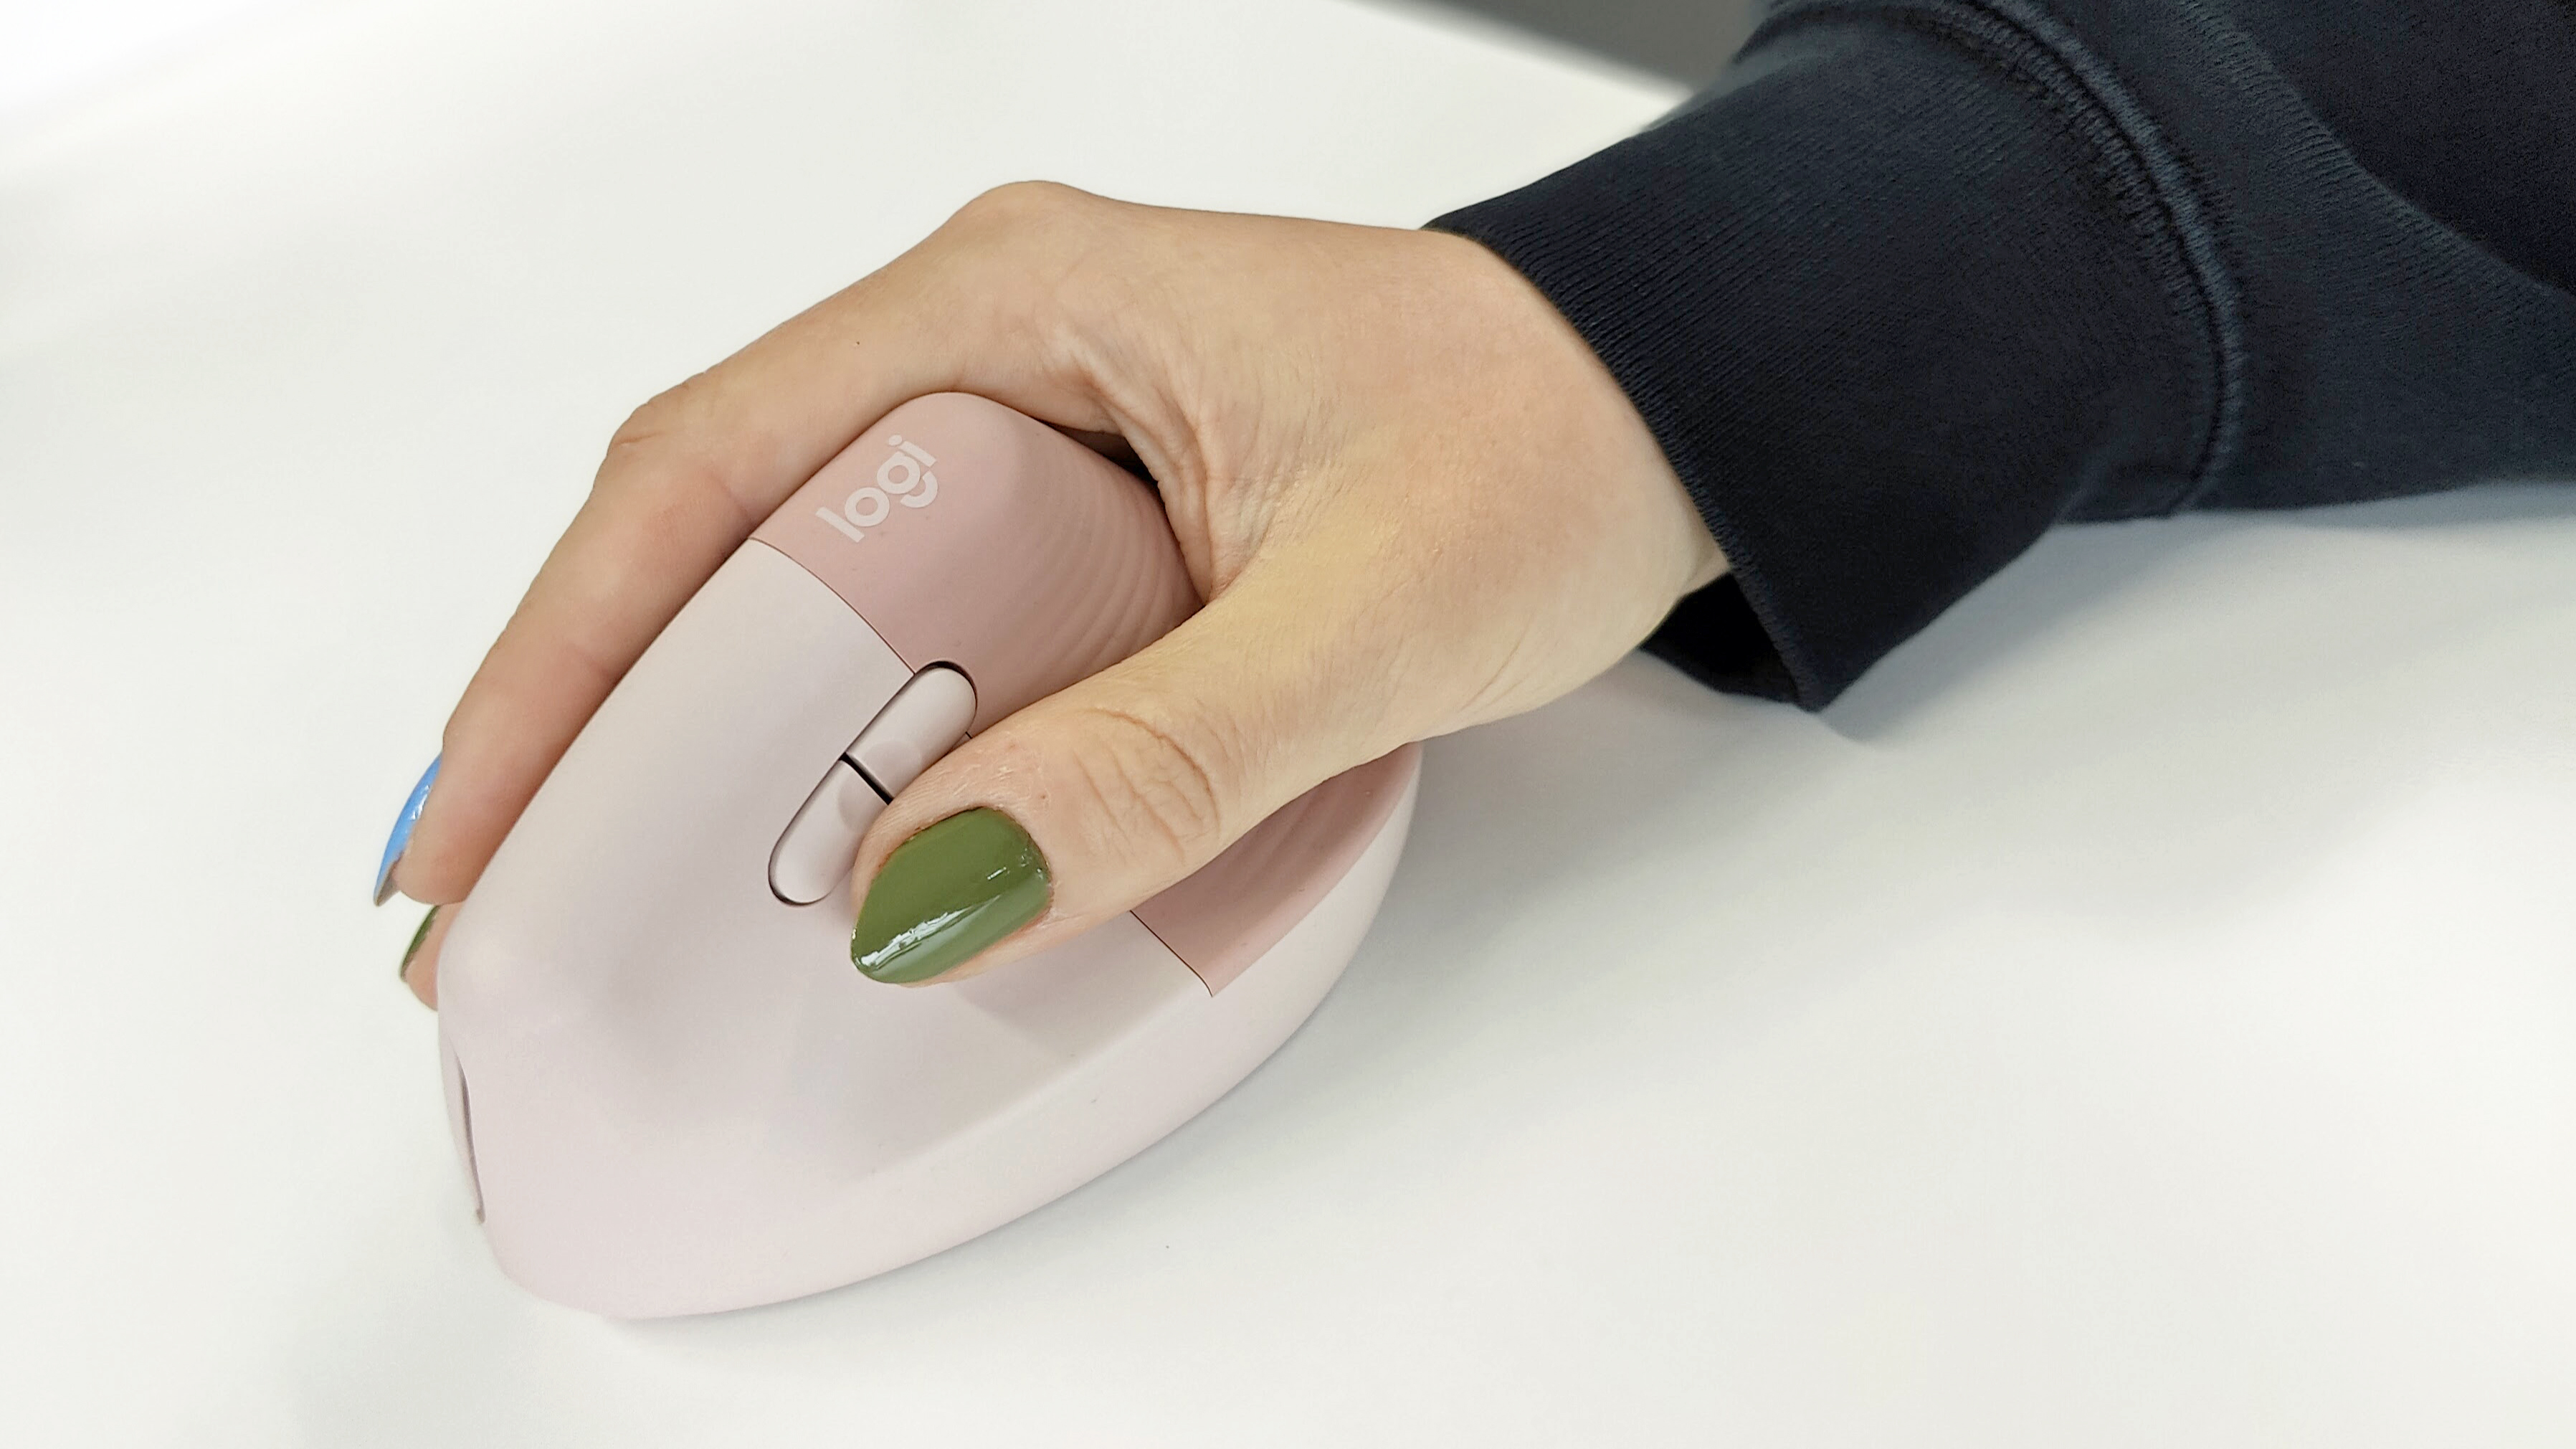 The new Logitech Lift is a cheaper, colorful vertical ergonomic mouse with  left-handed version and long battery life -  News